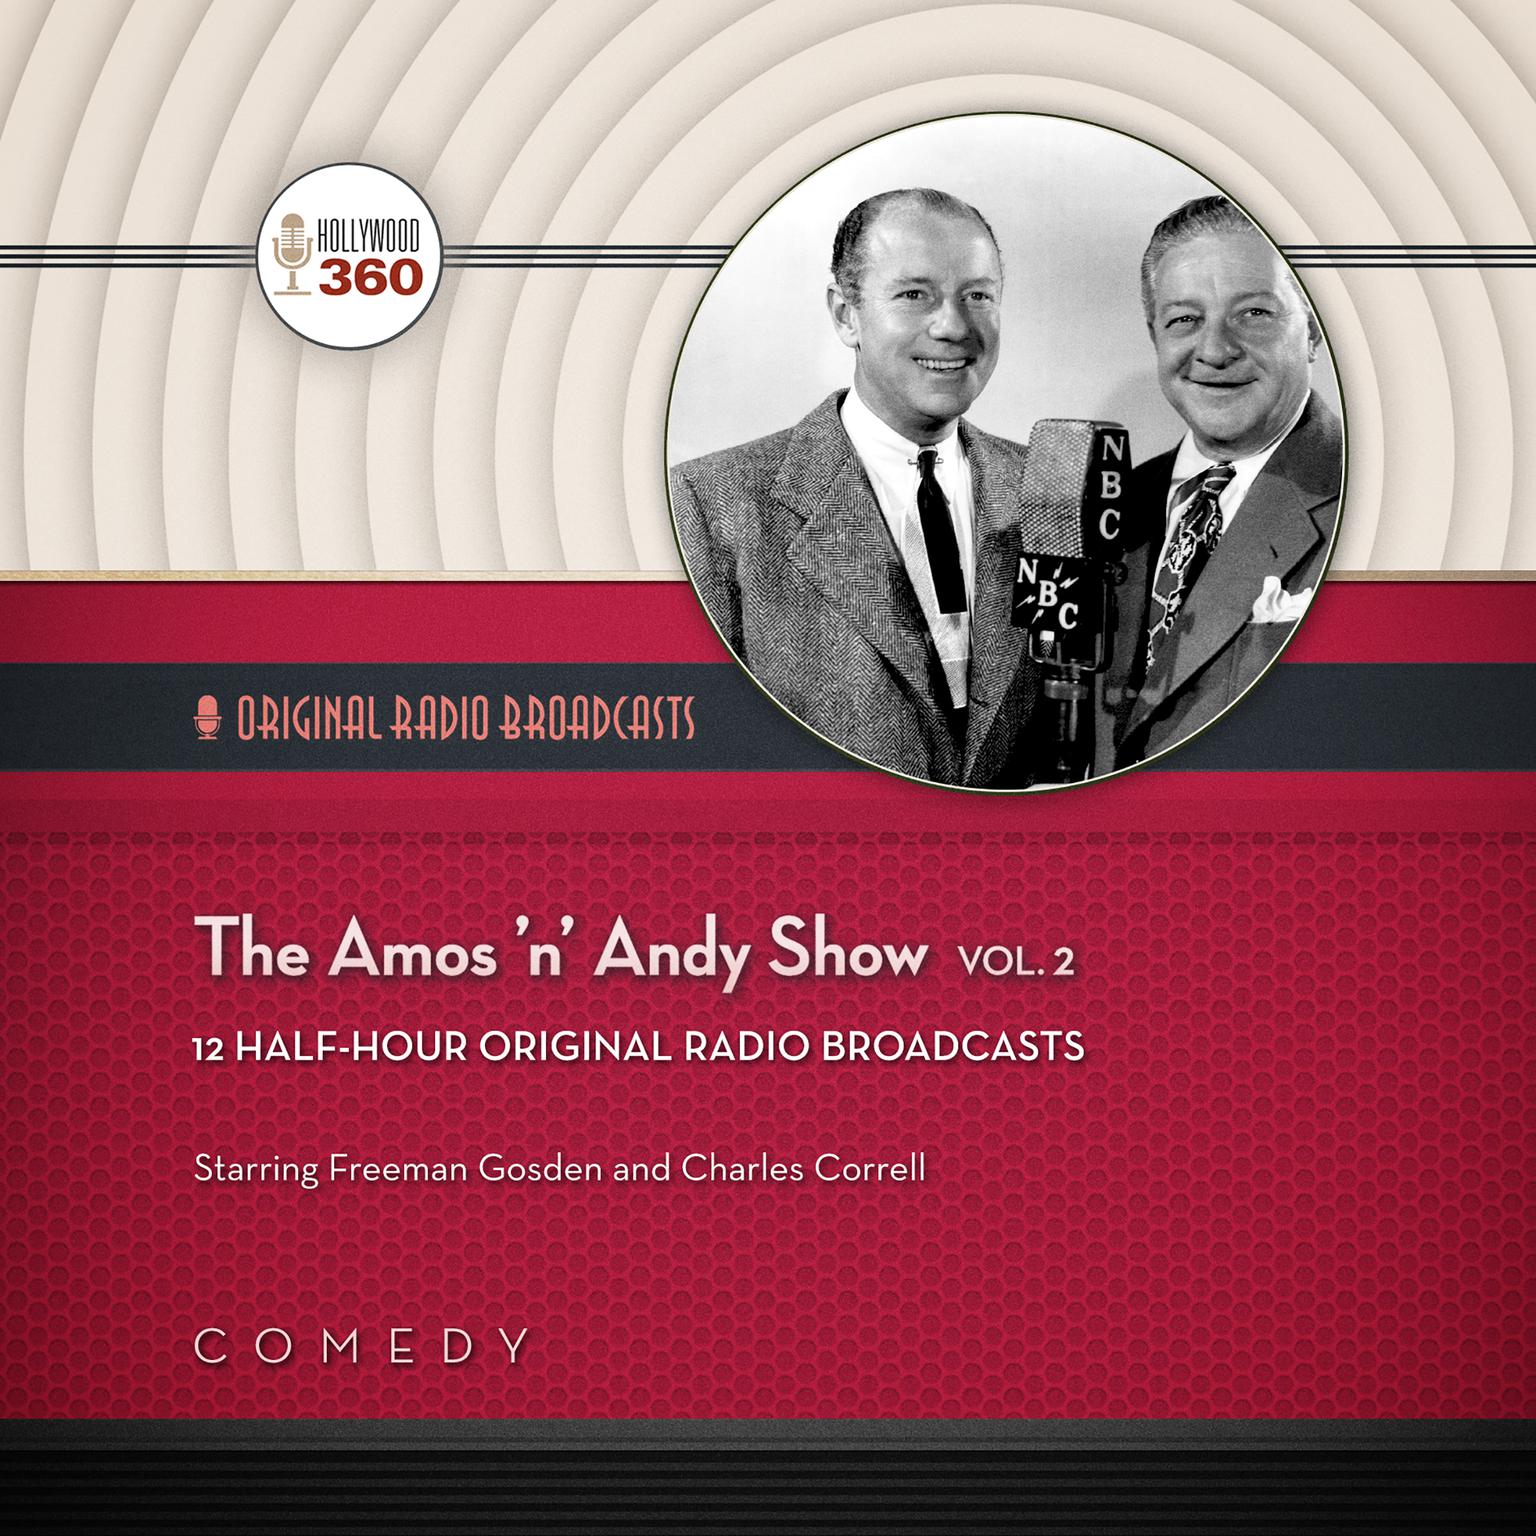 The Amos ’n’ Andy Show, Vol. 2 Audiobook, by Hollywood 360